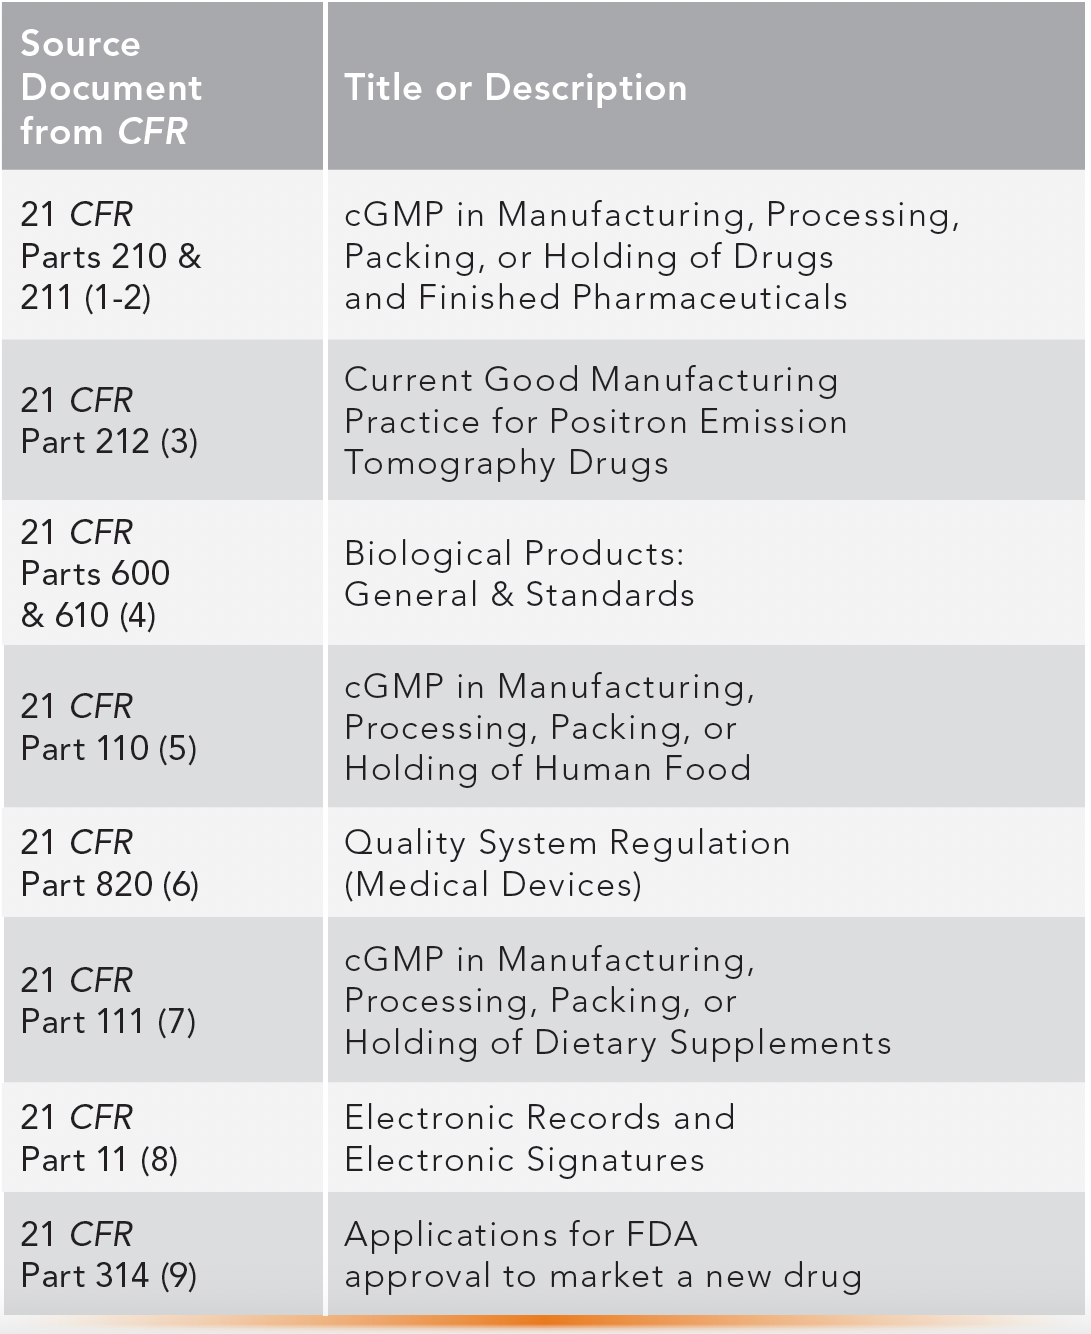 TABLE II: A list of cGMP regulations in the United States